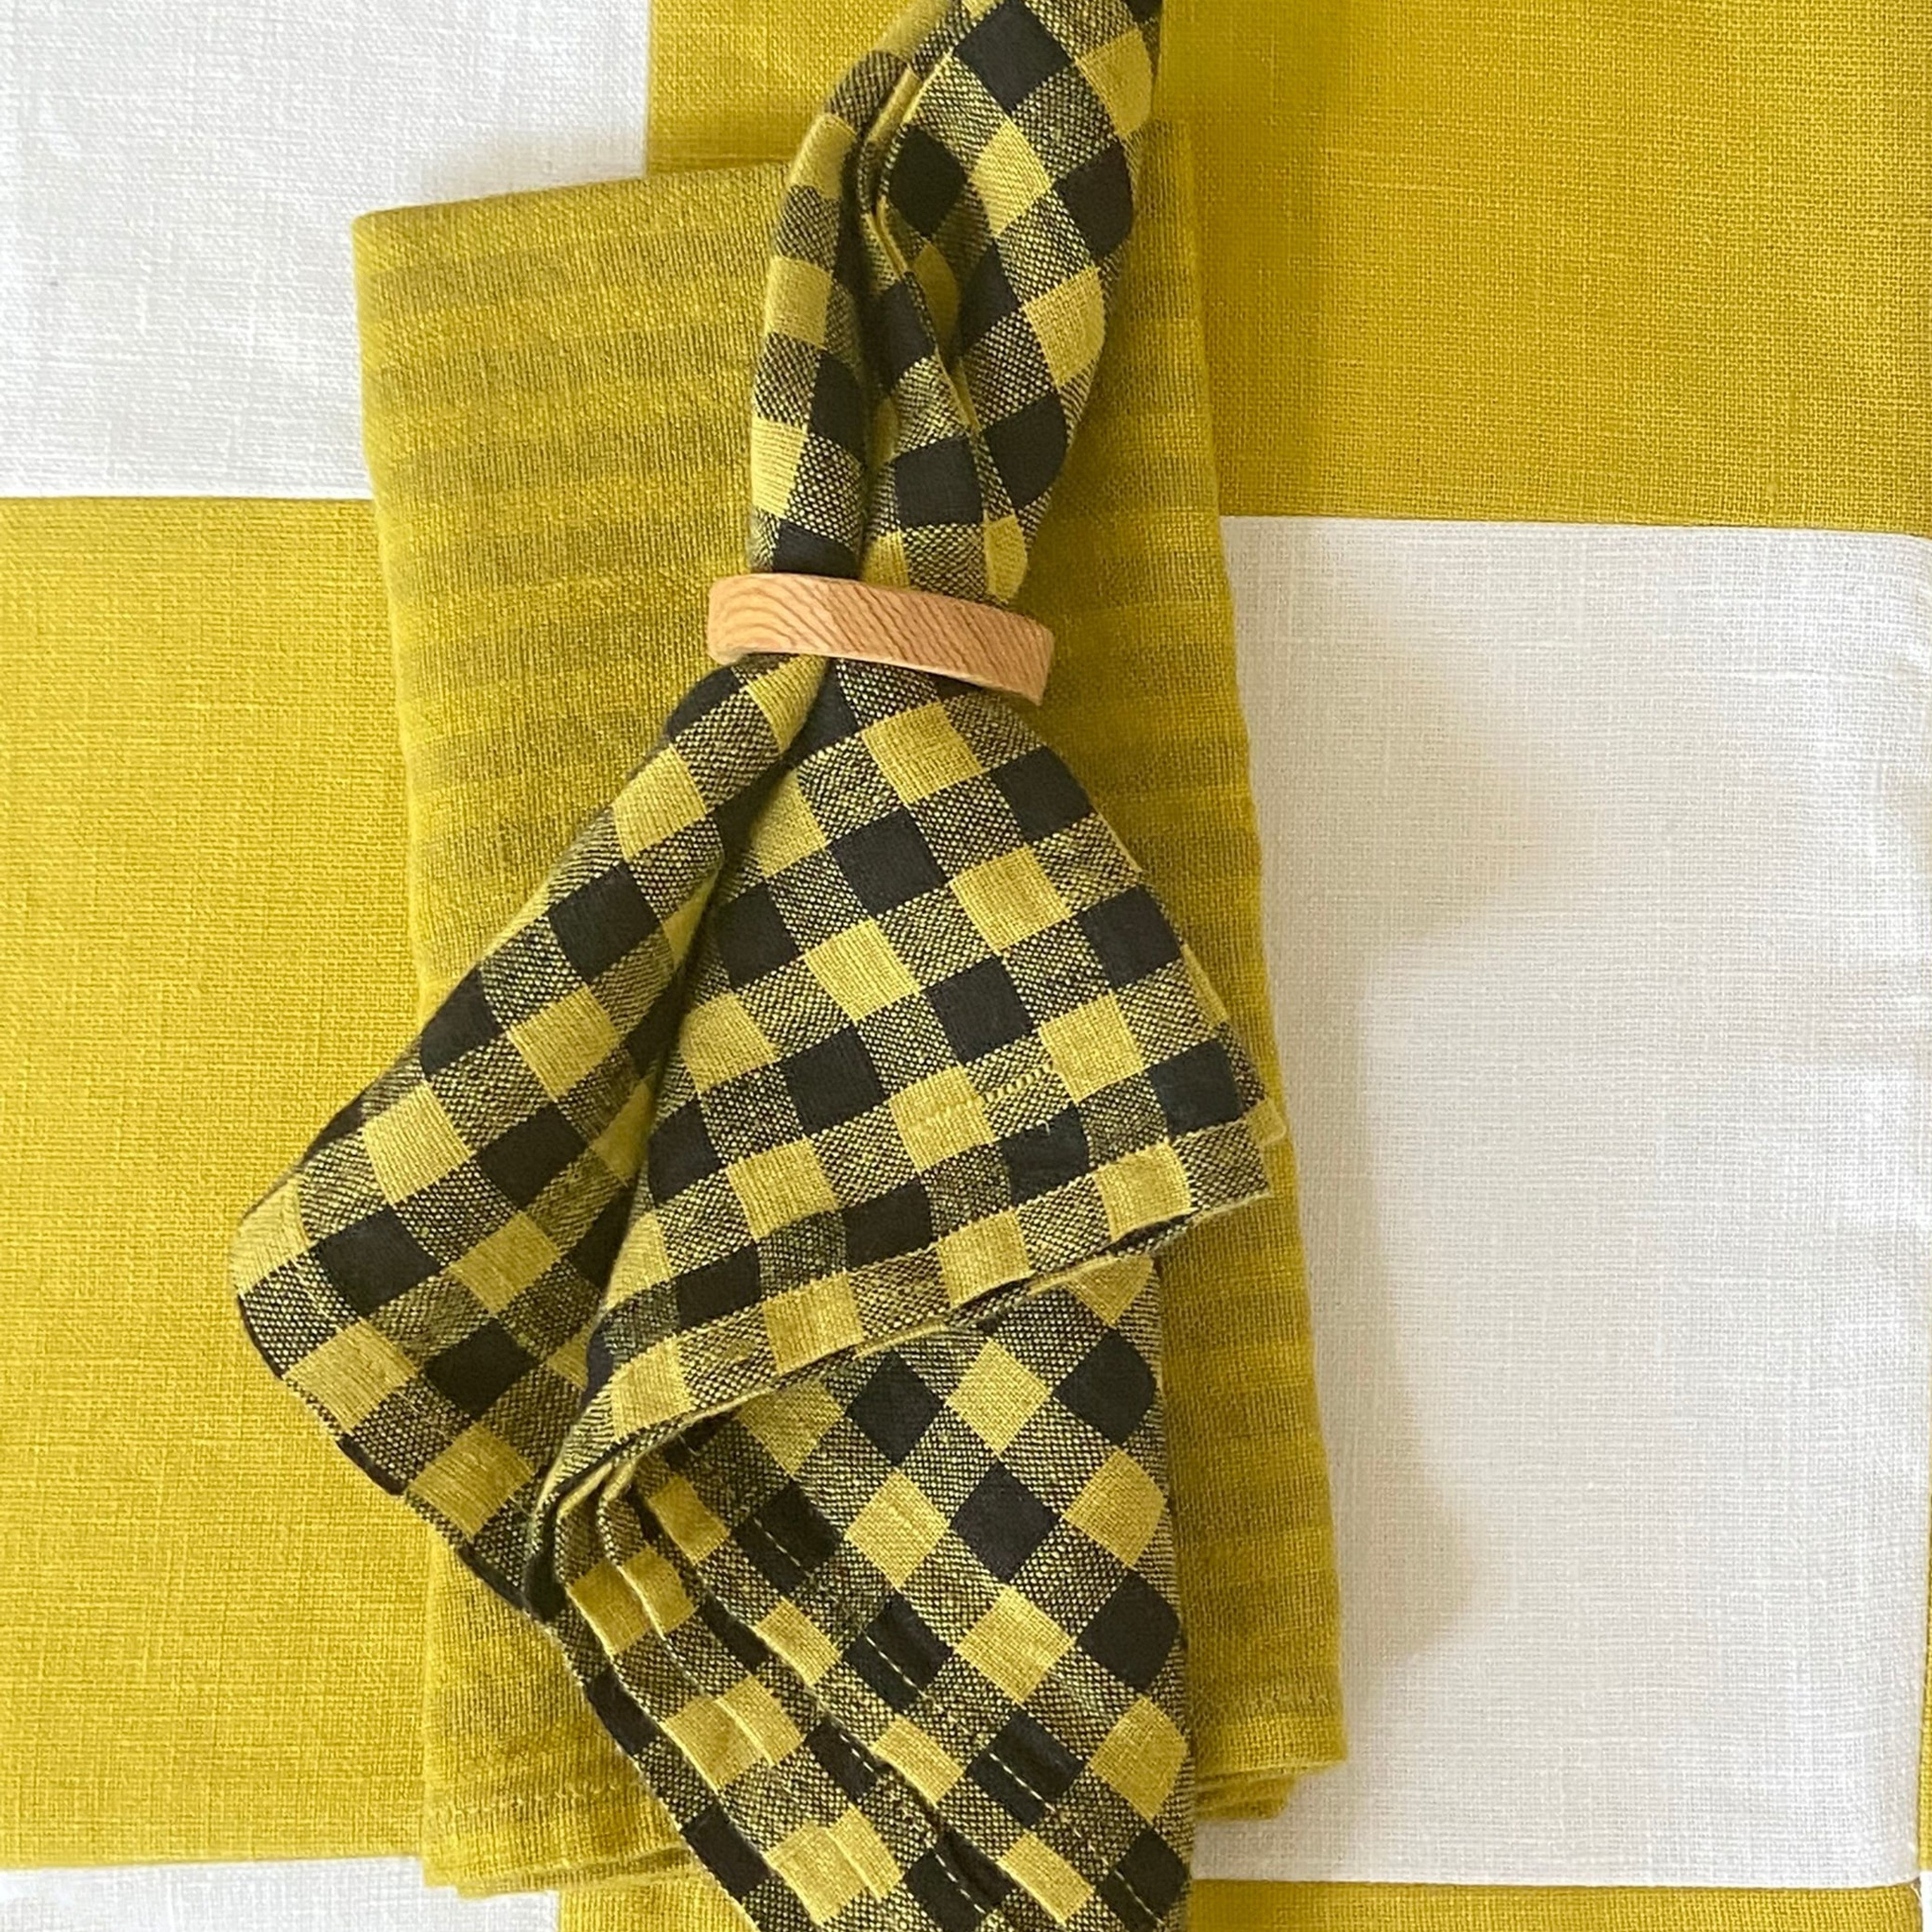 Gingham Tablecloth Set in Pear